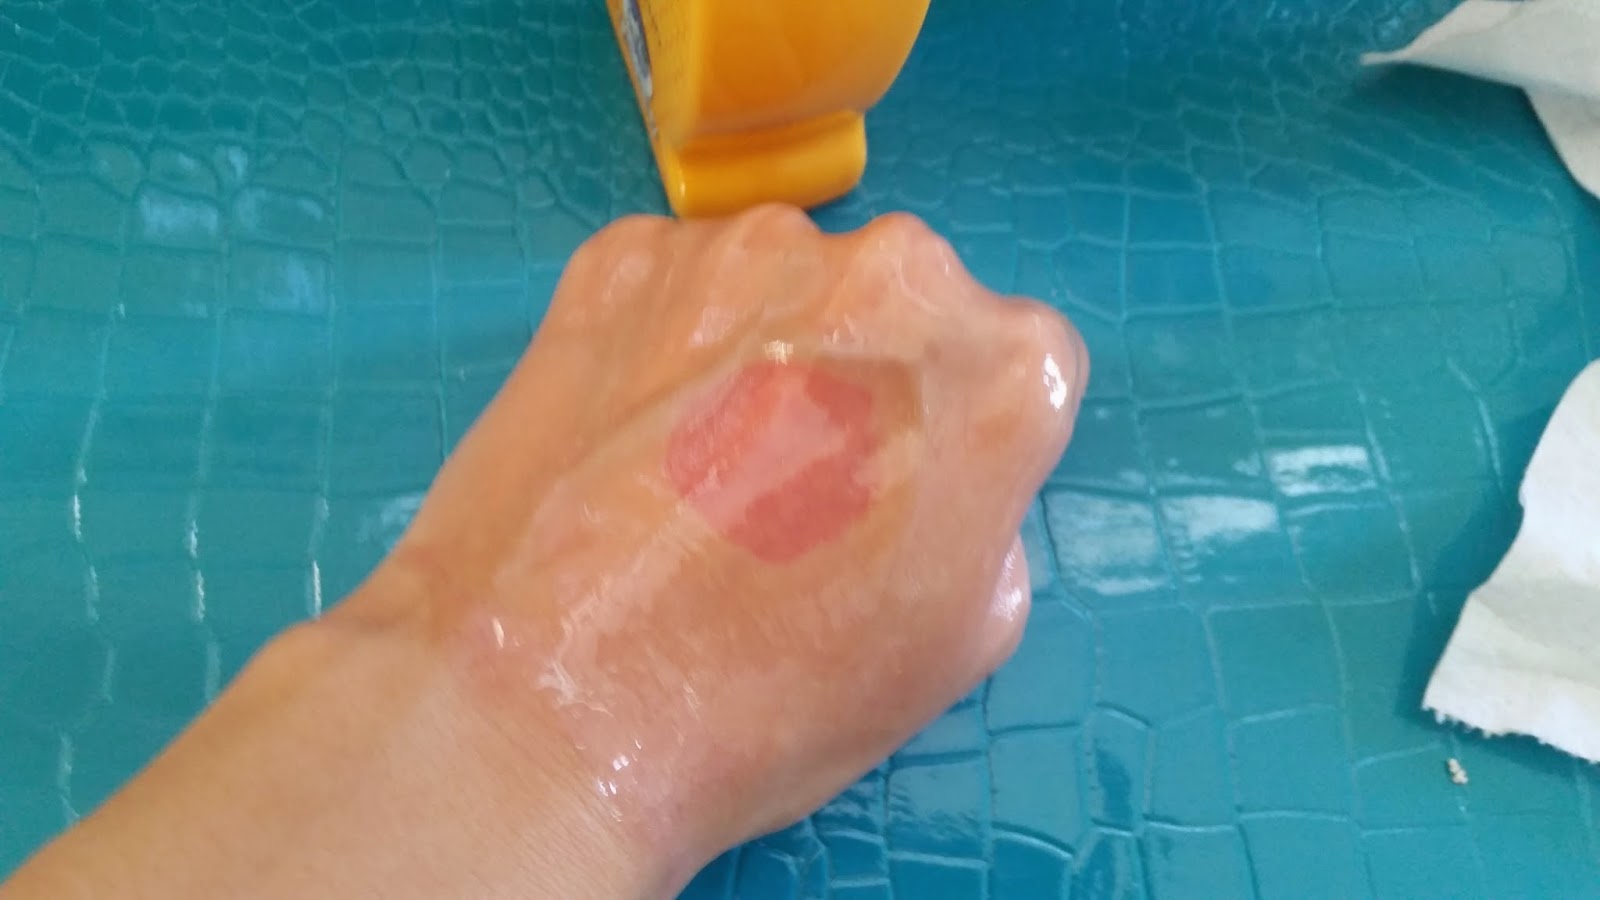 cleansing oil on the back of my hand to cleanse off makeup